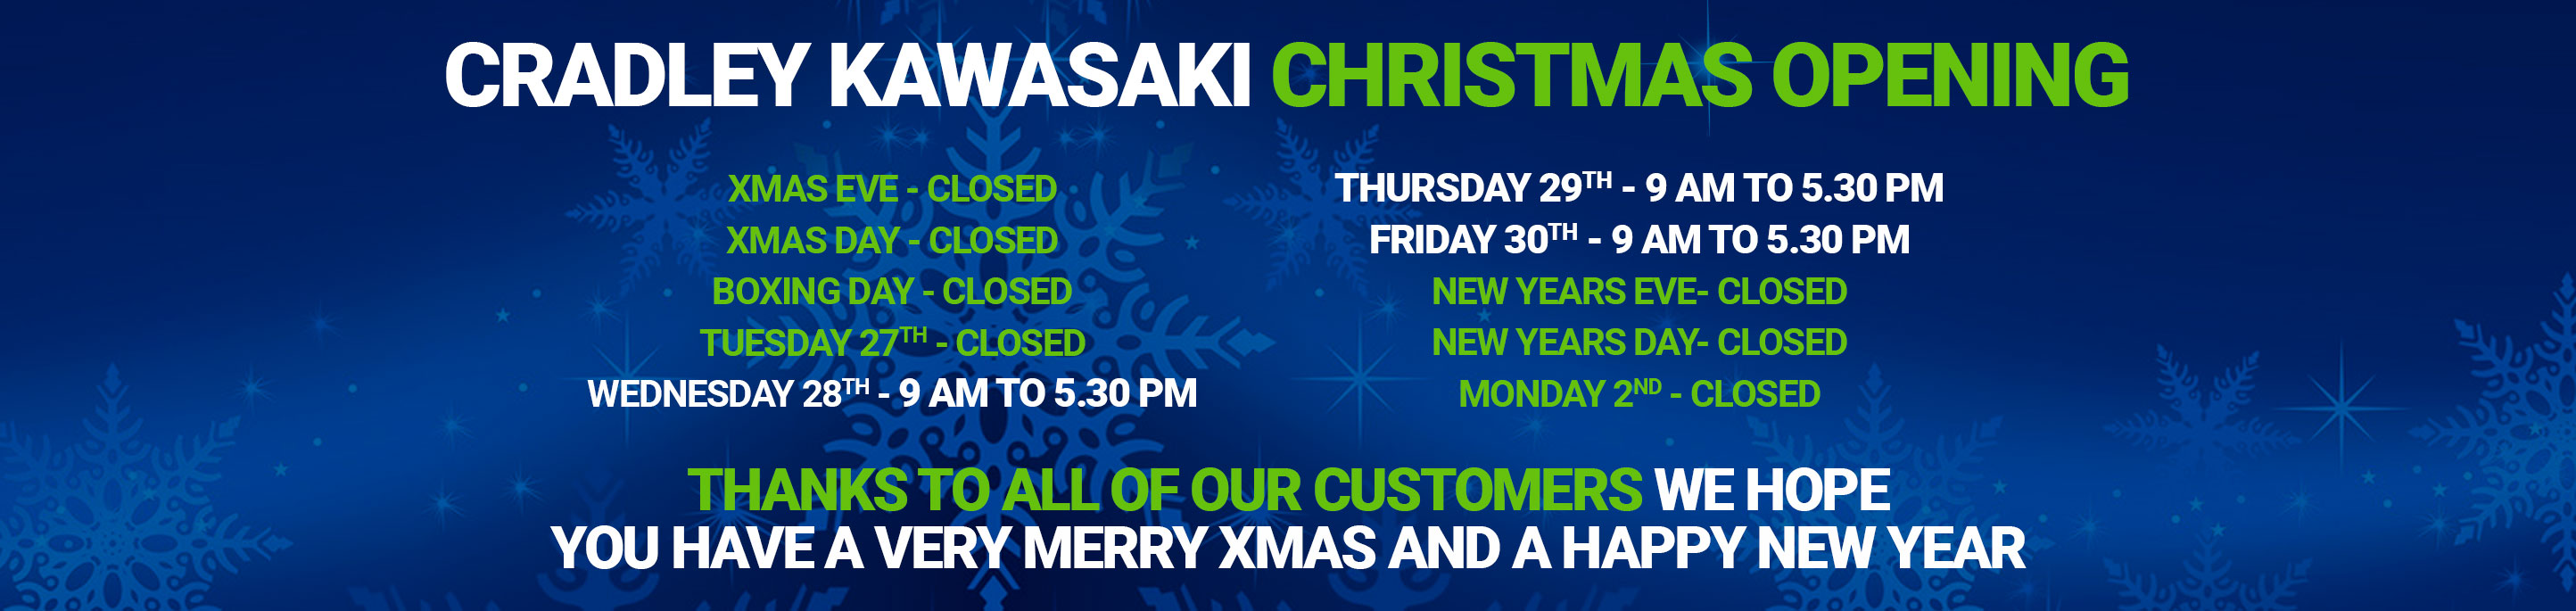 XMas Opening Hours Graphic